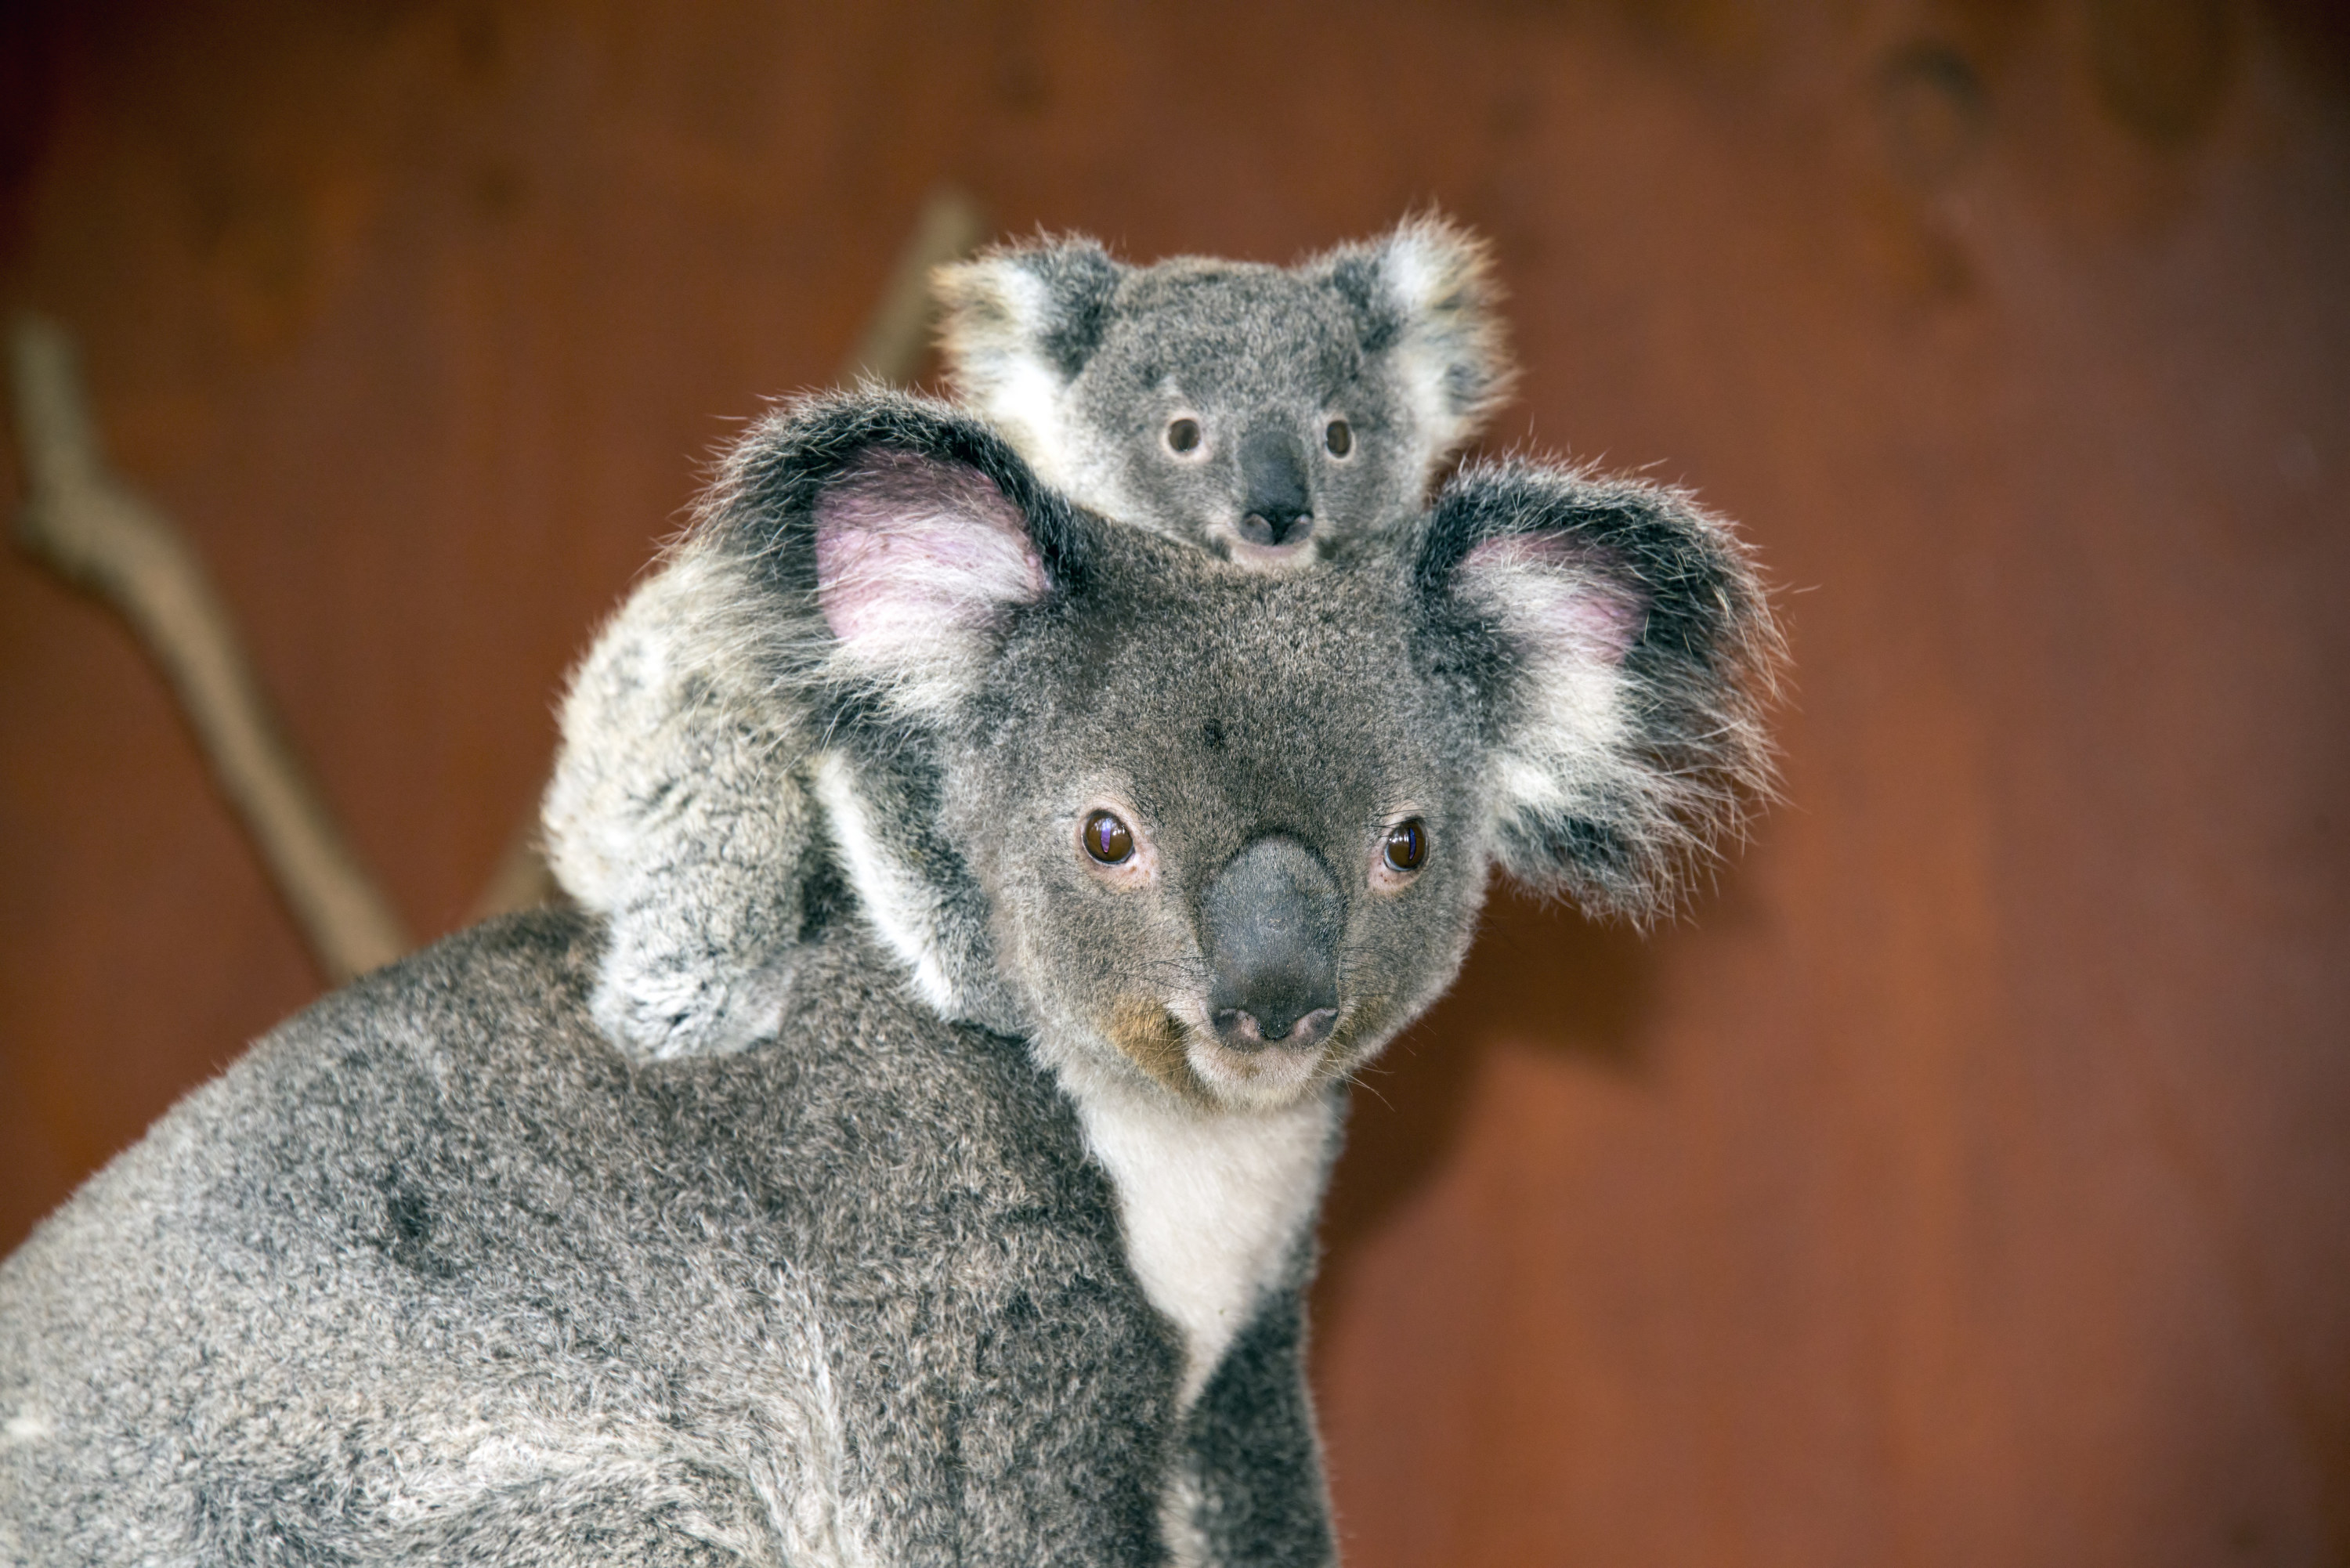 Mother and baby koalas in Australia